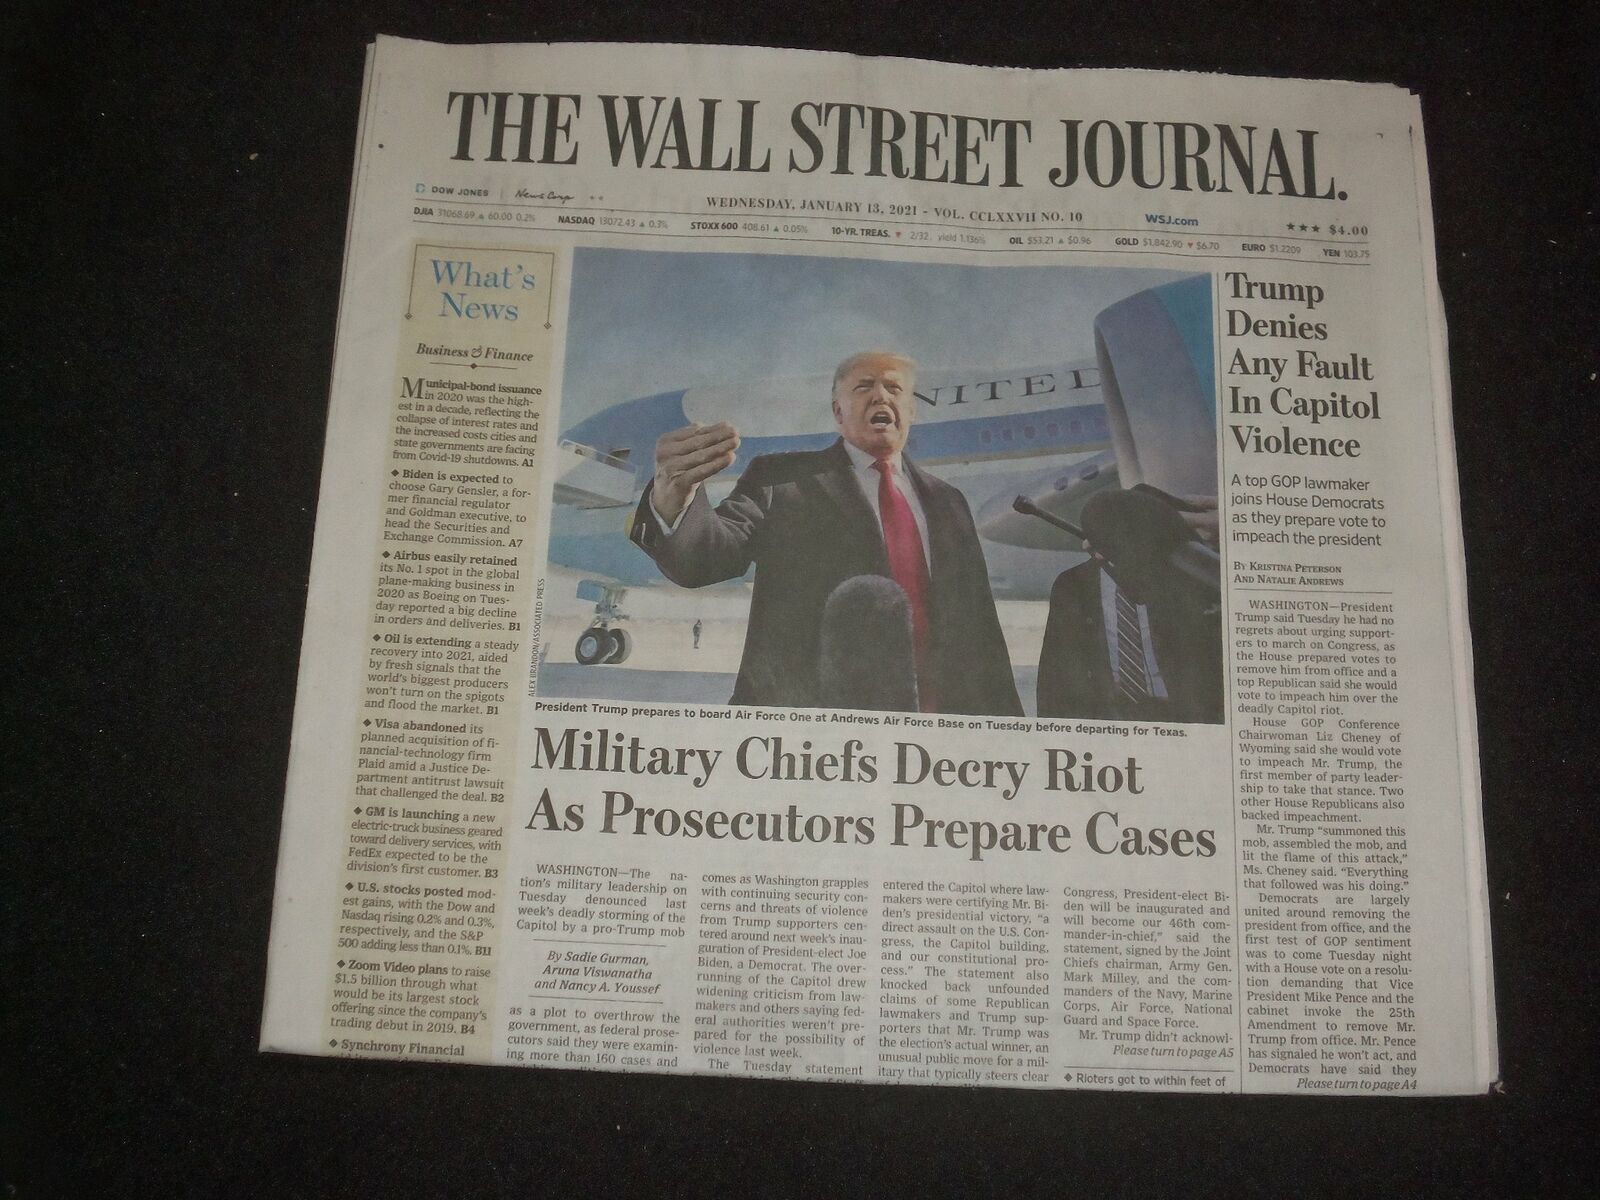 2021 JANUARY 13 THE WALL STREET JOURNAL - TRUMP DENIES FAULT IN CAPITOL VIOLENCE